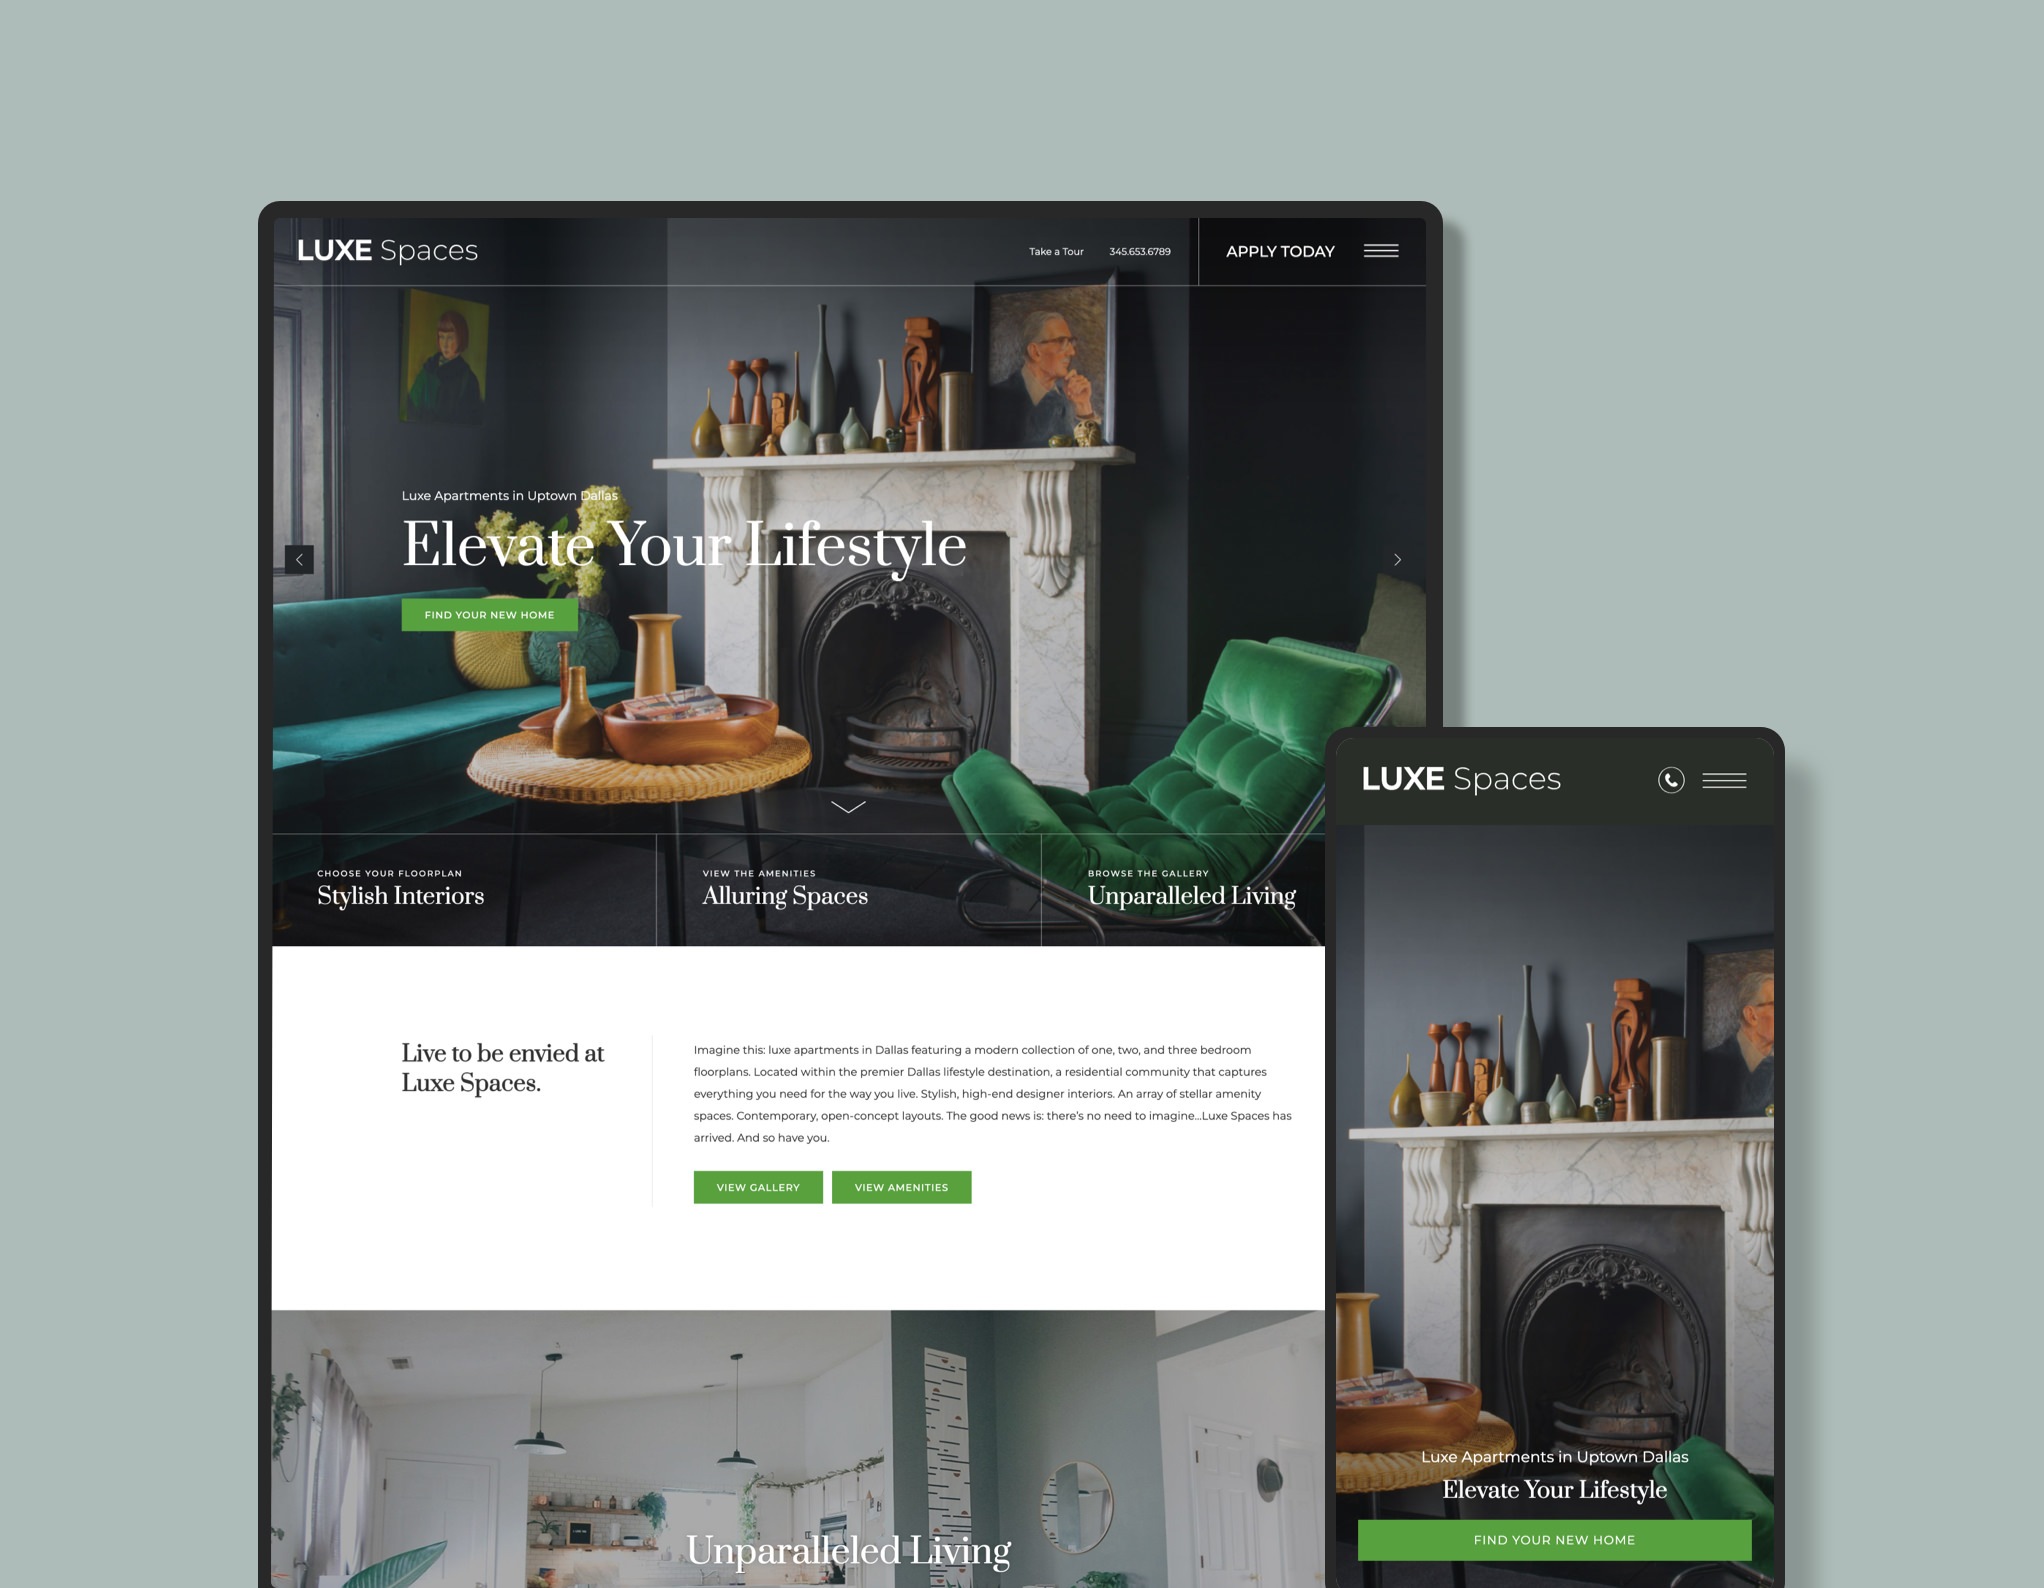 LUXE Spaces Multifamily Website Theme Powered by Jonah